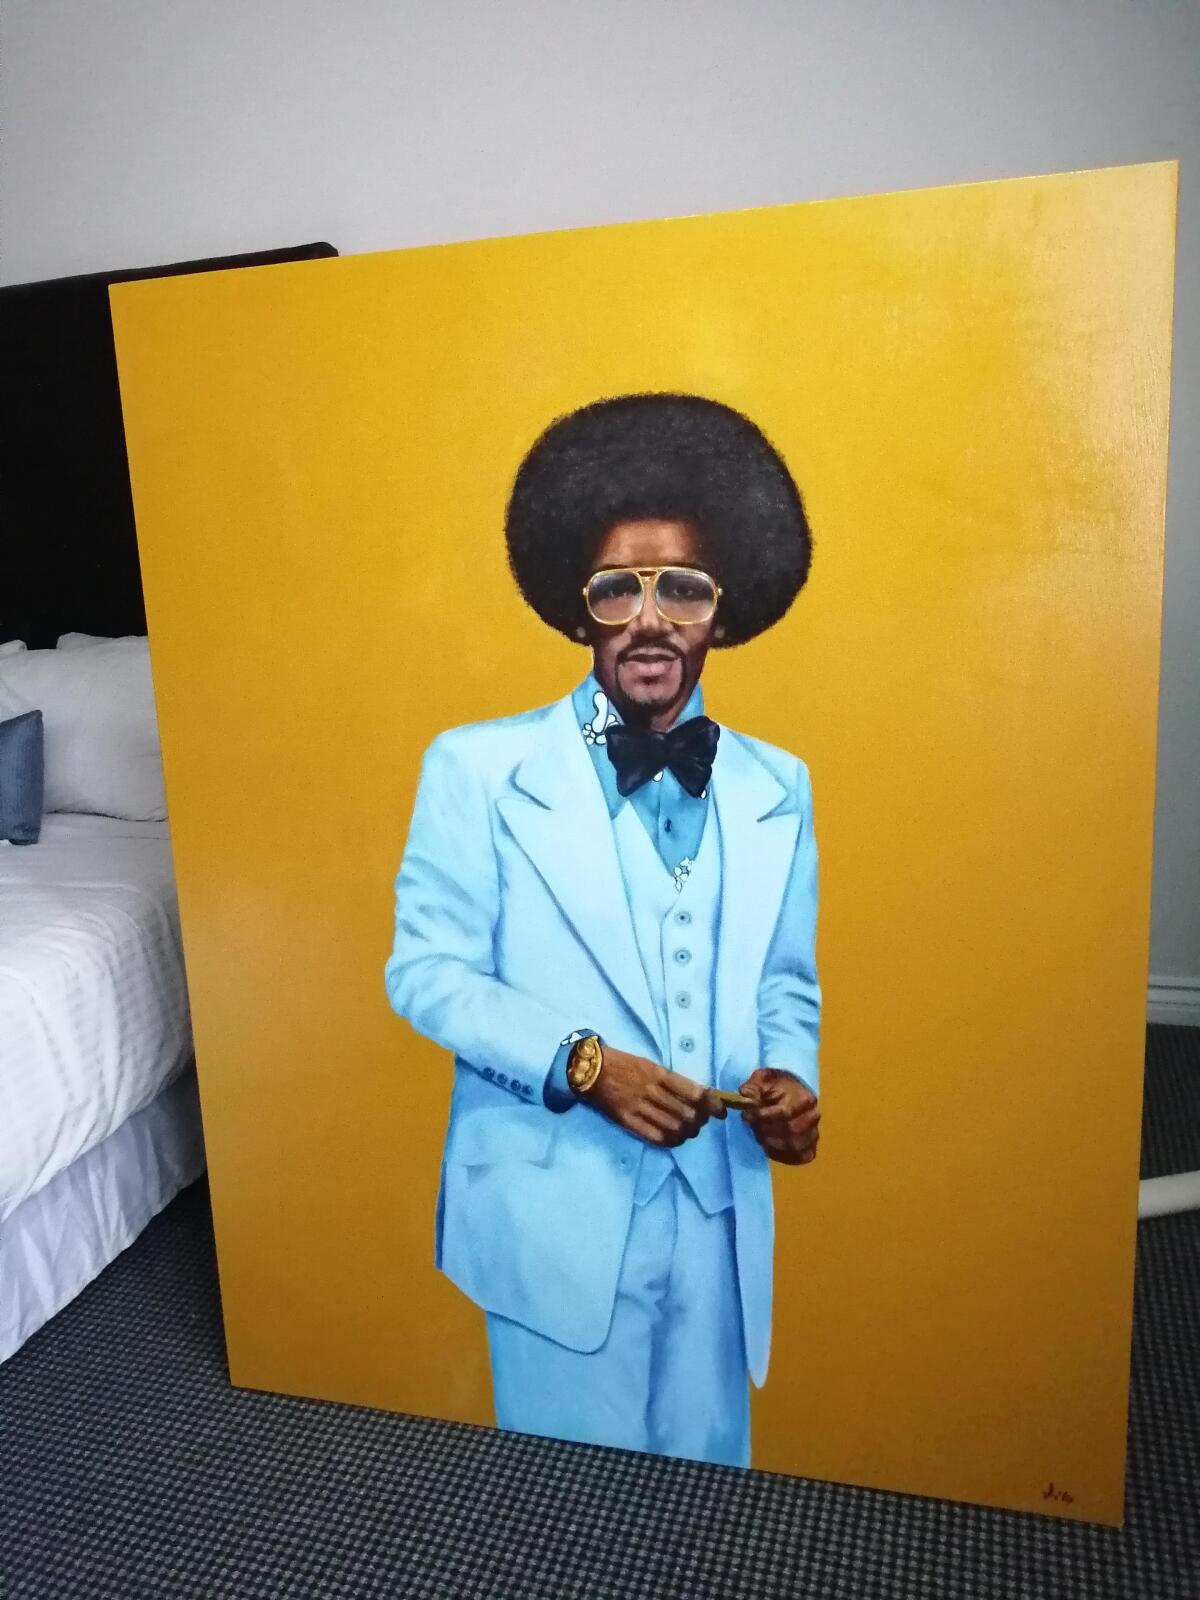 Painting of a Black man in a powder blue 1970s suit against mustard background